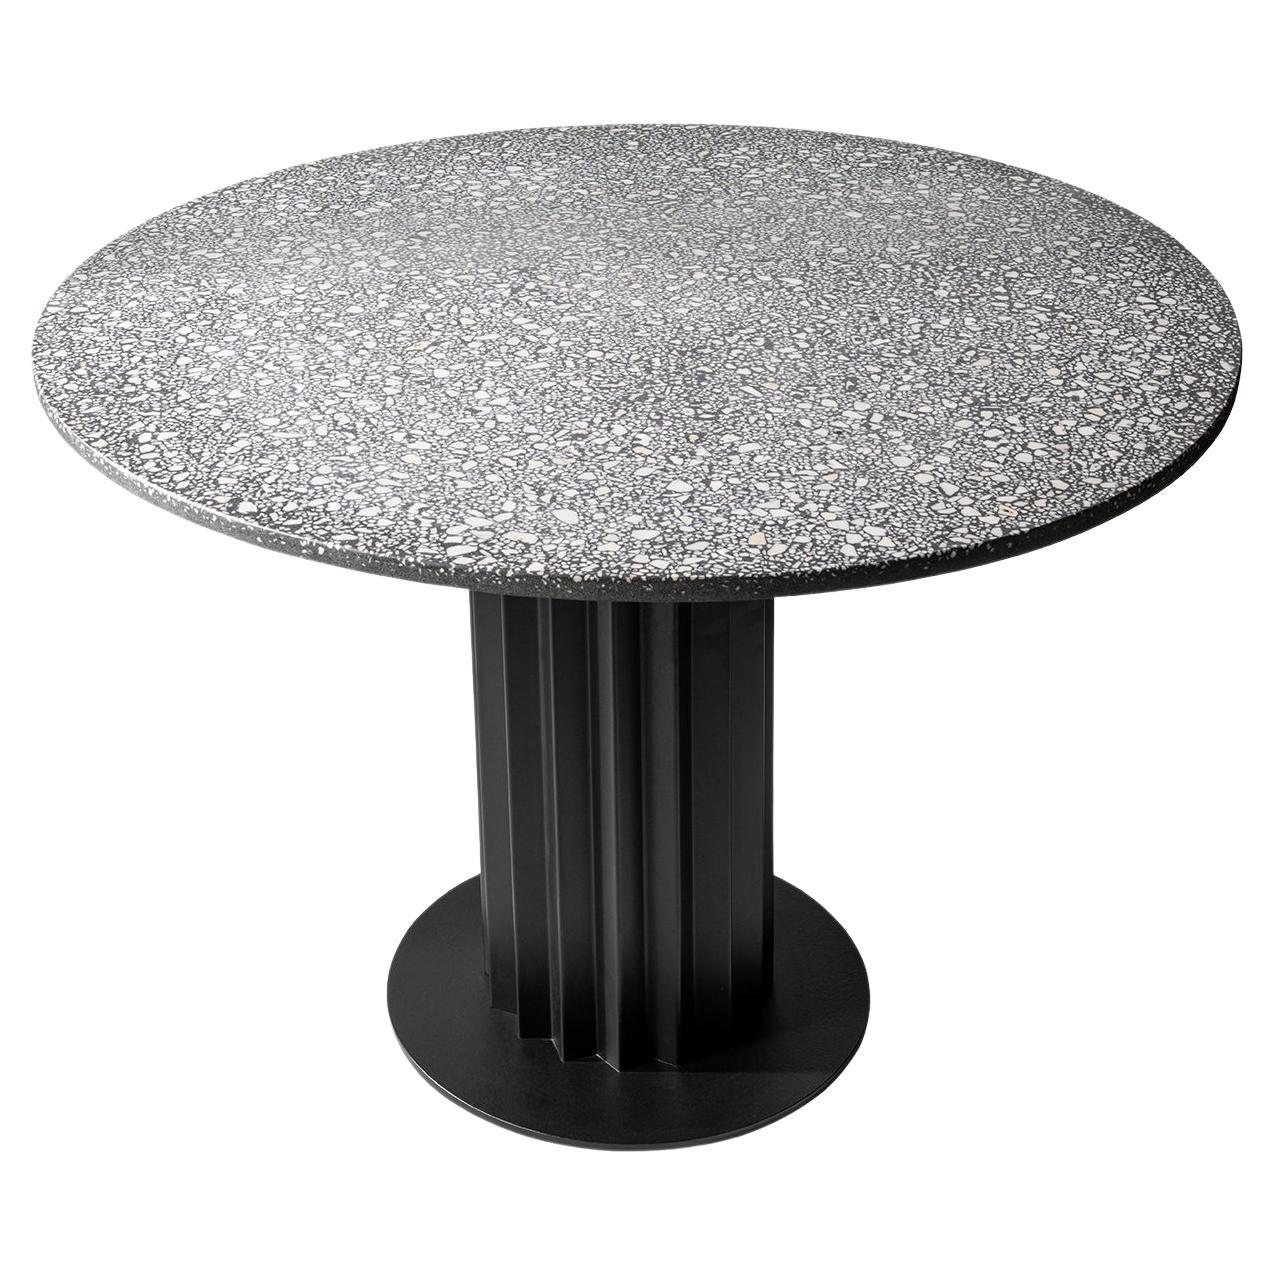 Recalled Round Black Metal and Terrazzo Dining Table